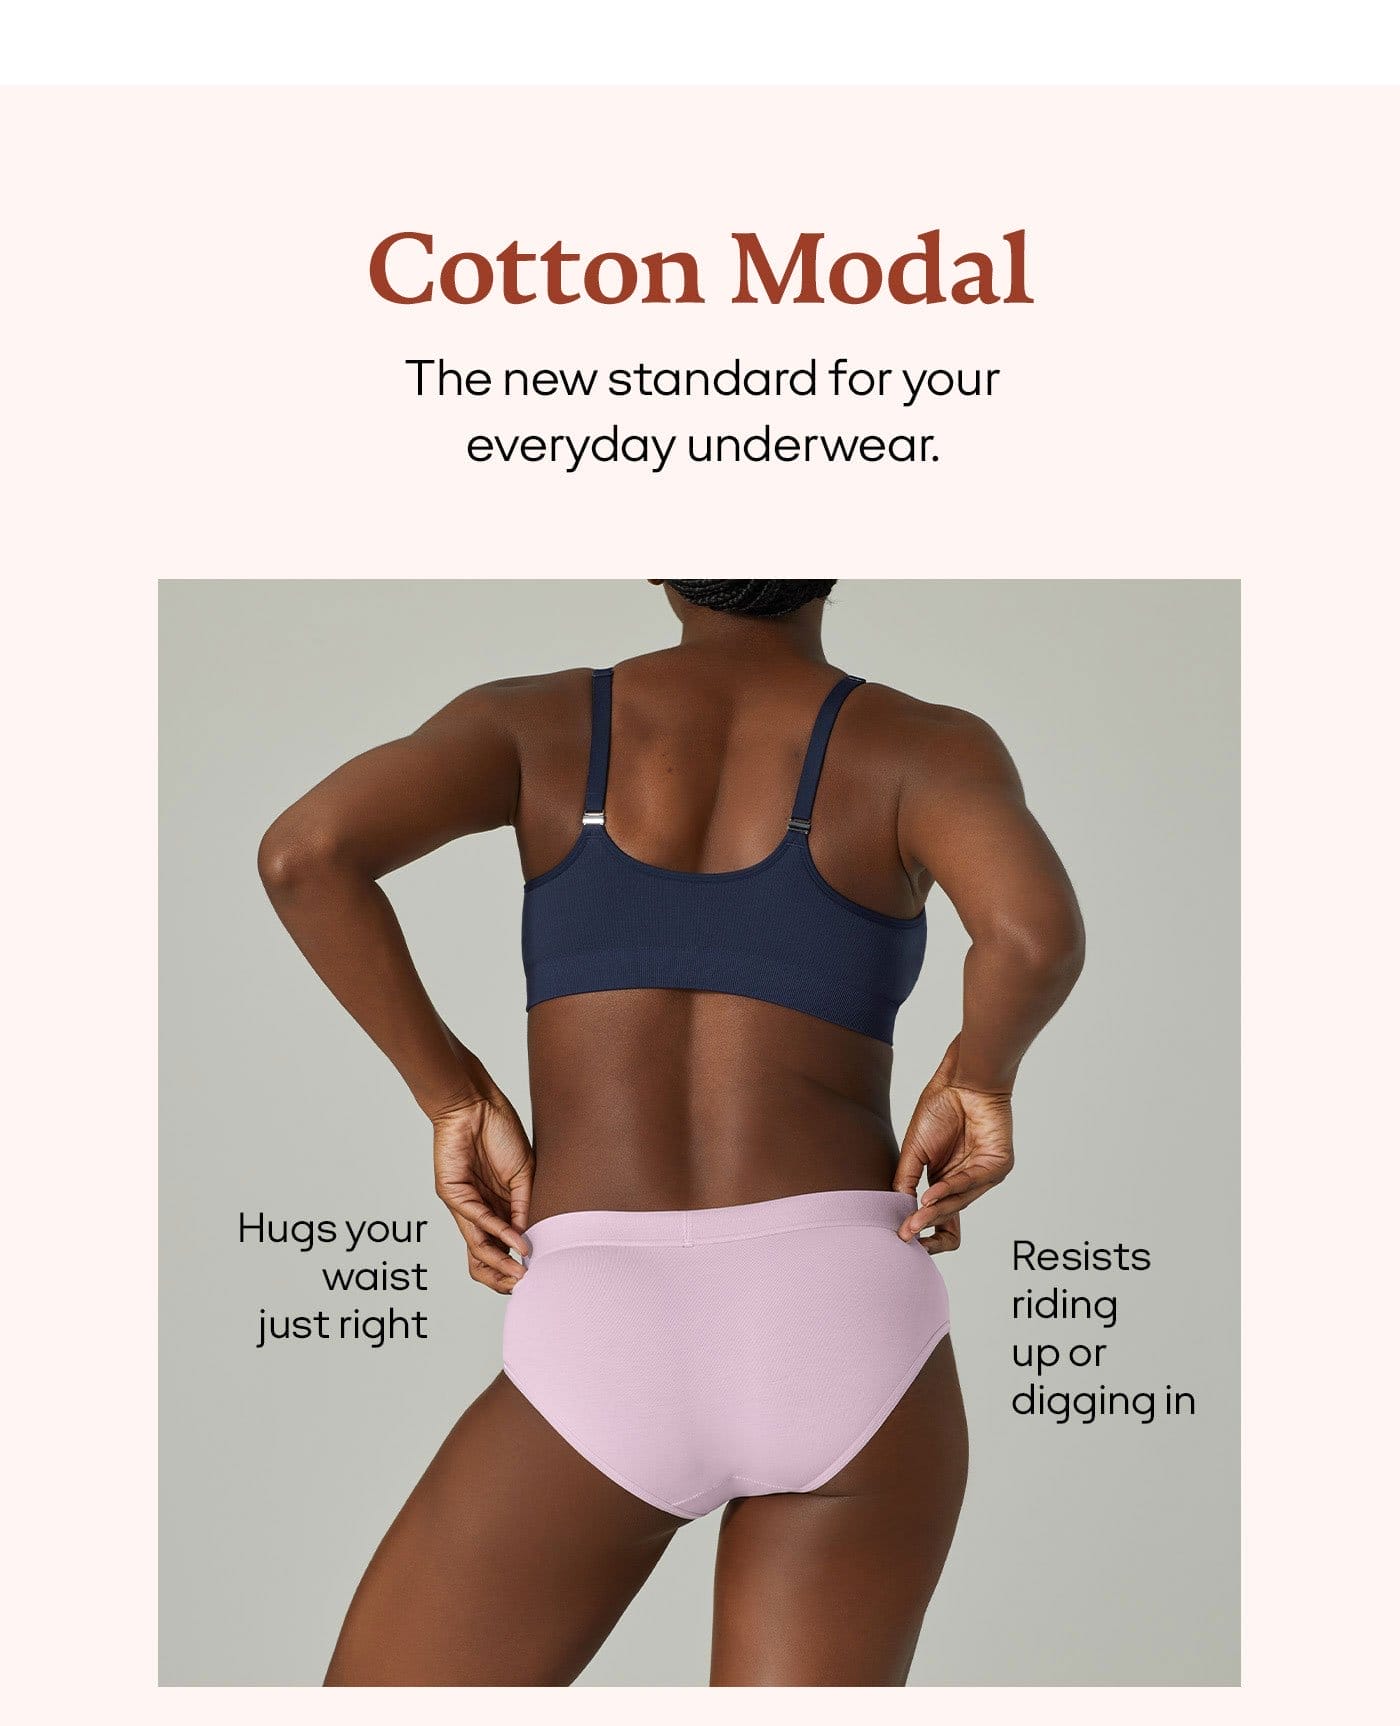 Cotton Modal | The new standard for your everyday underwear.